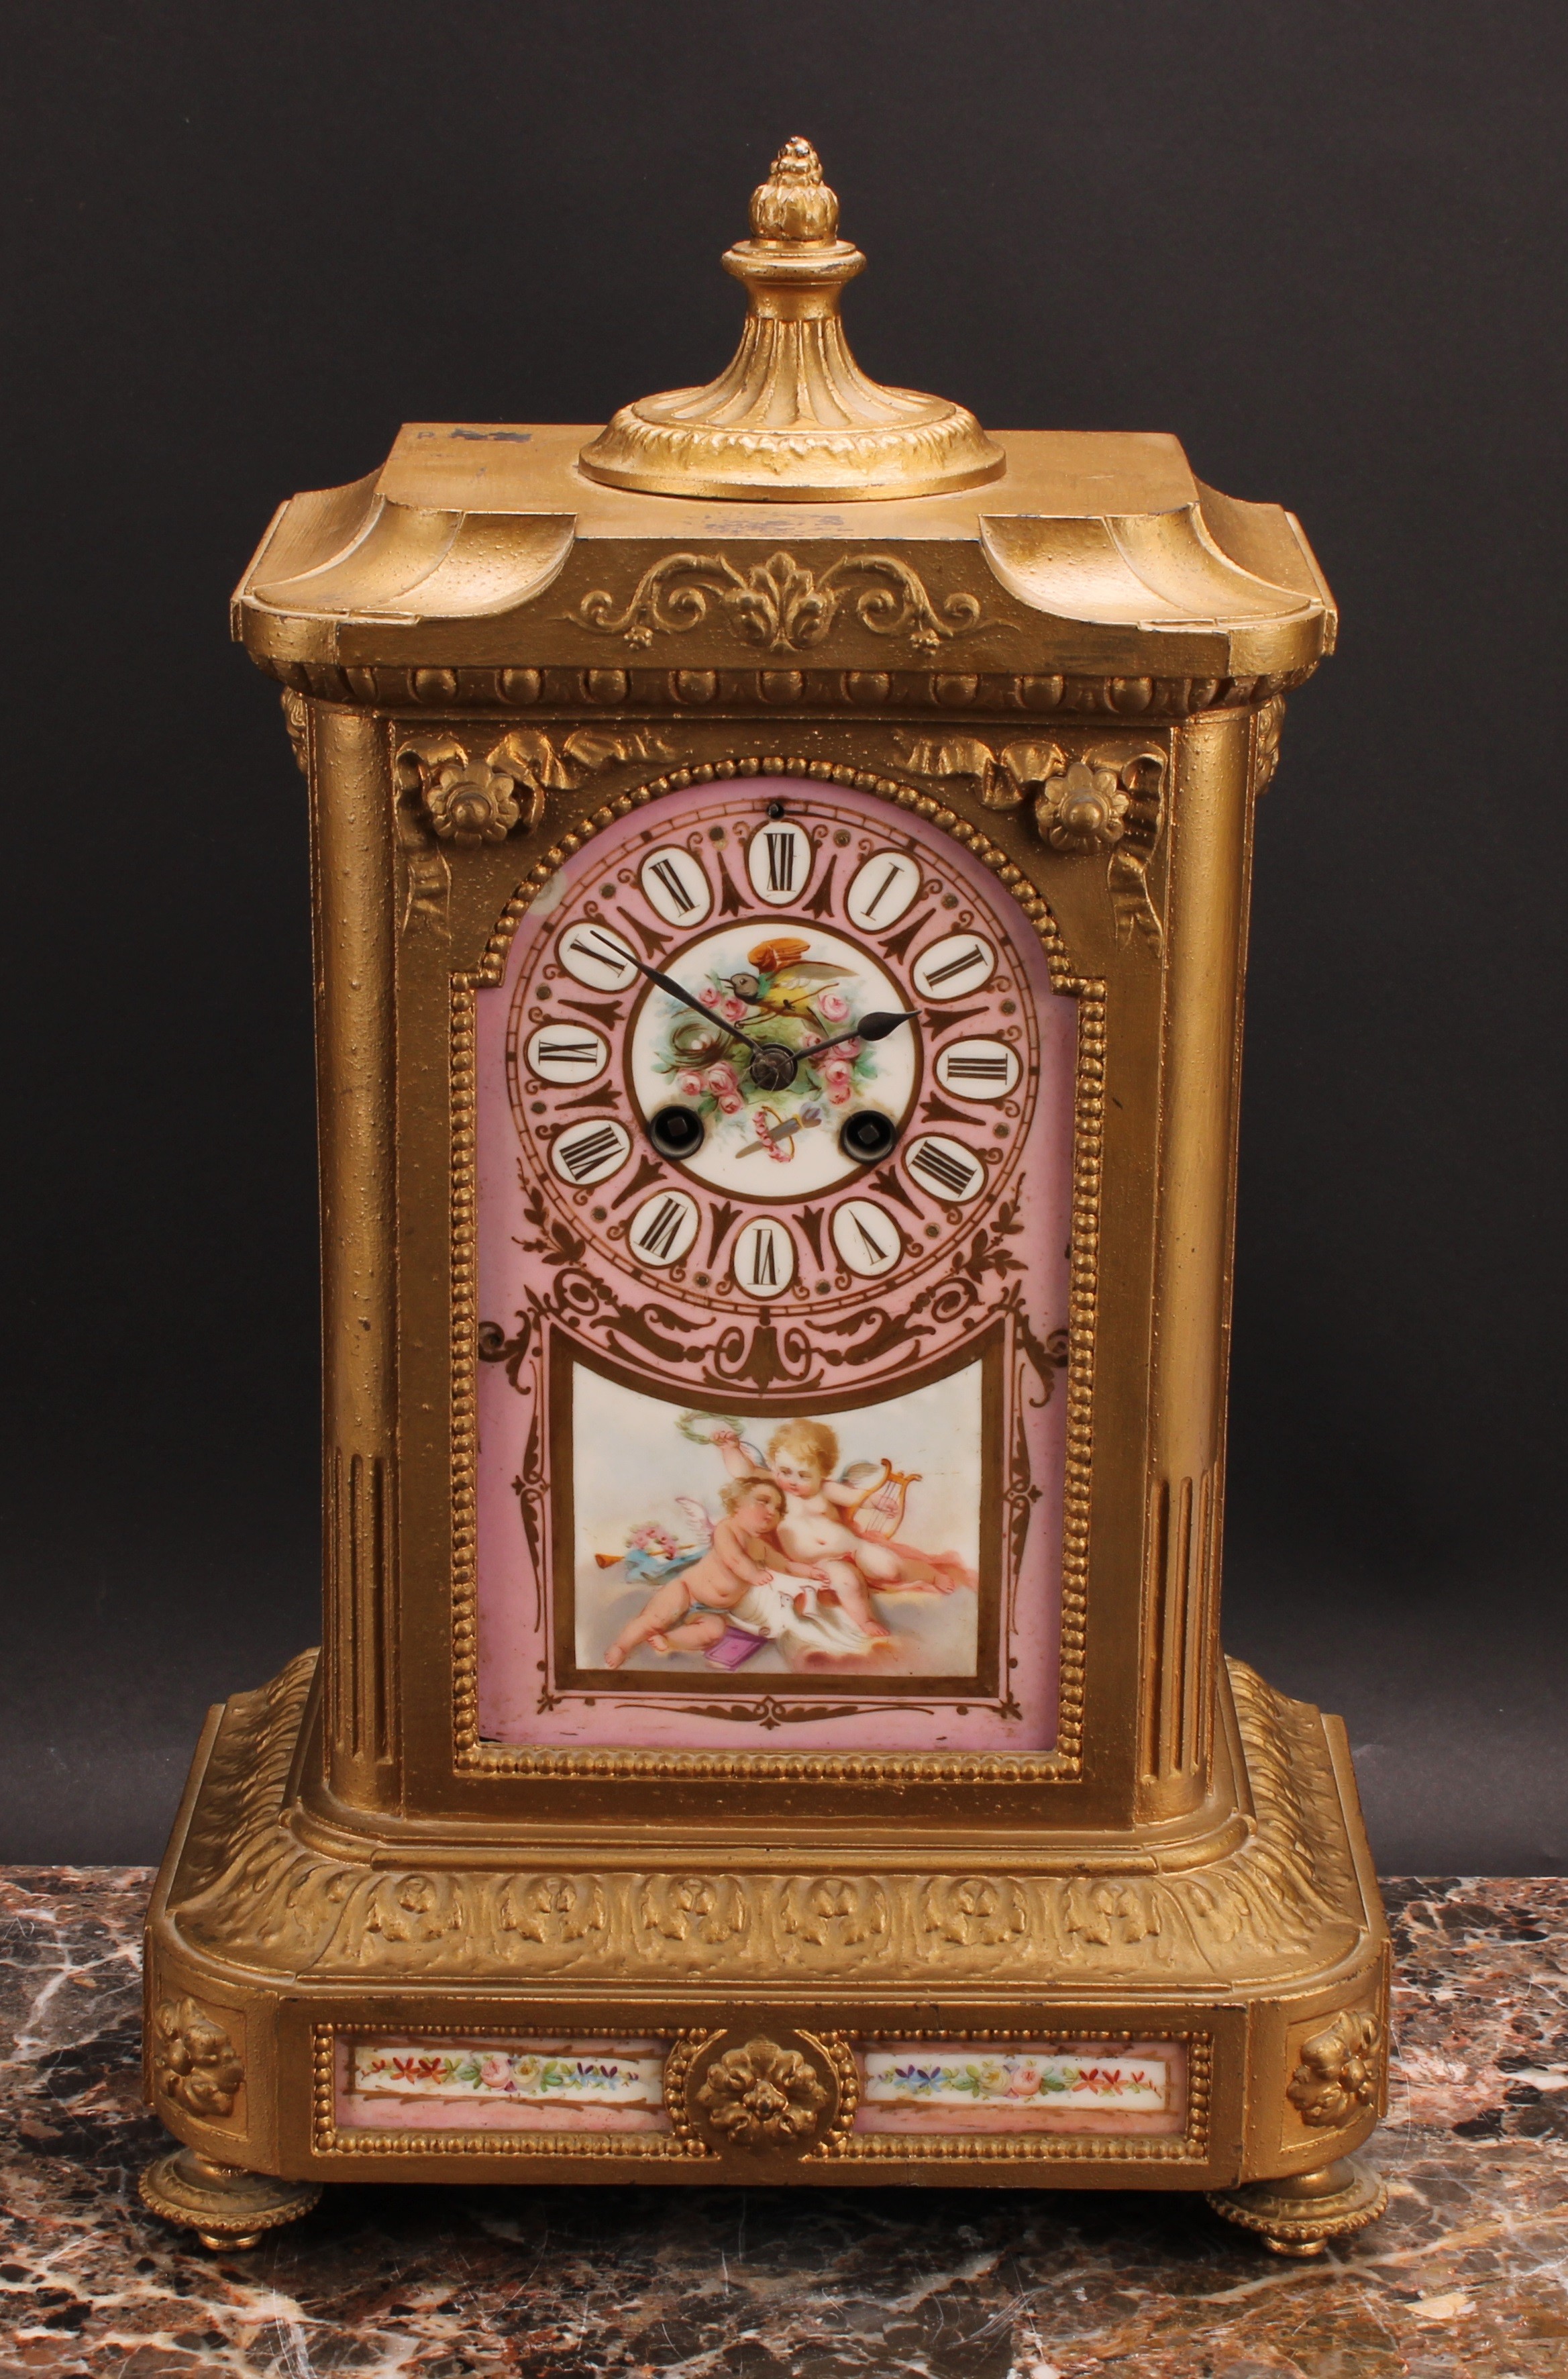 A late 19th century French spelter and porcelain mantel clock, the panel inscribed with Roman